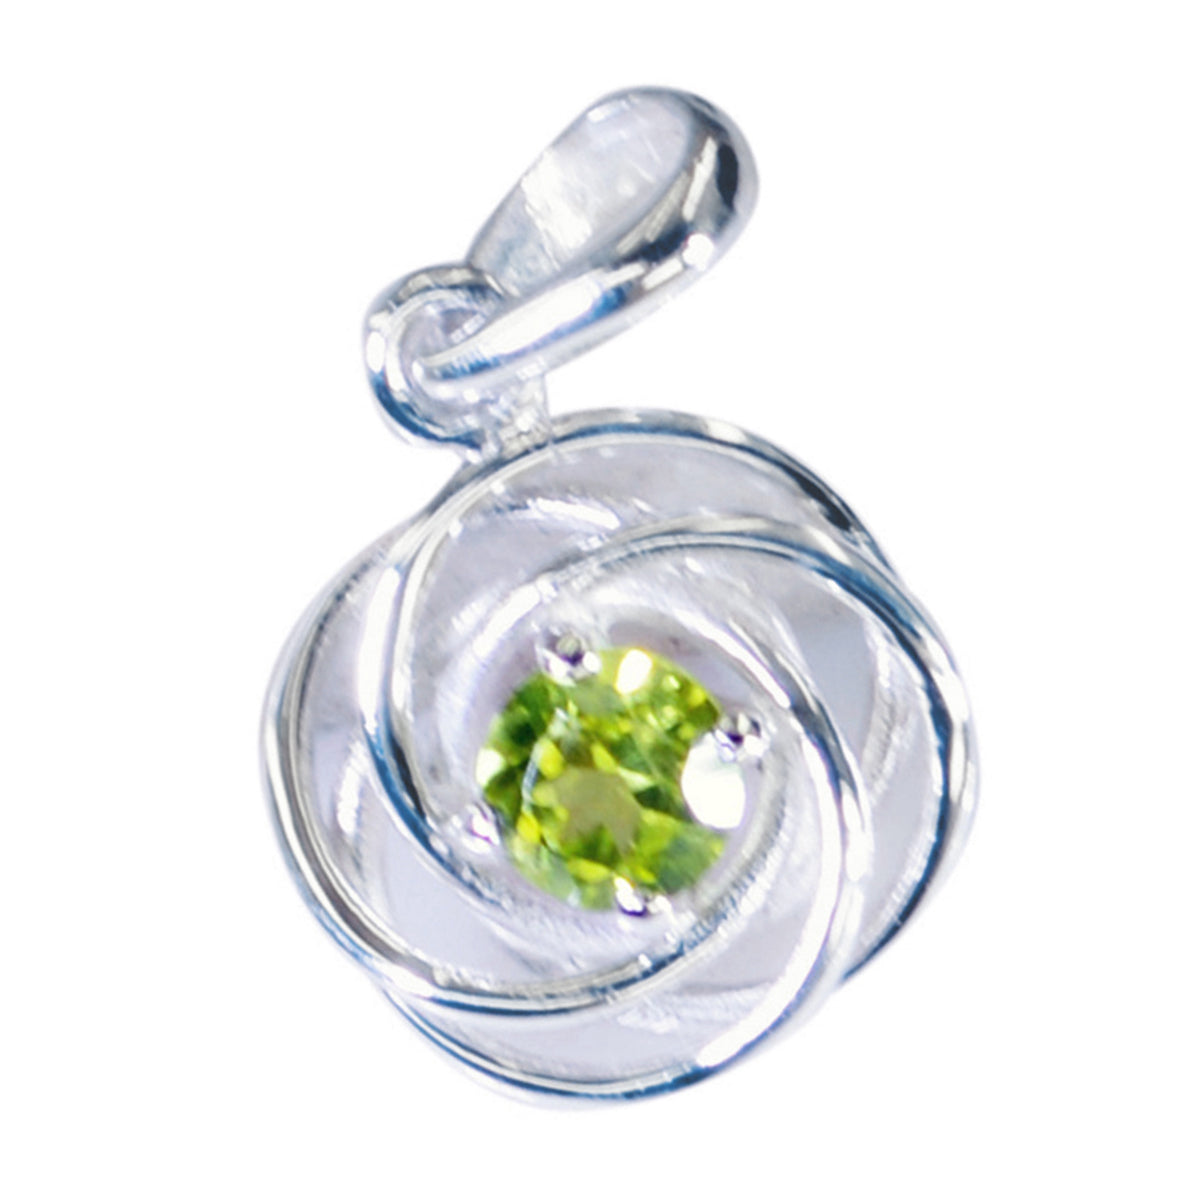 Riyo Prepossessing Gems Round Faceted Green Peridot Solid Silver Pendant Gift For Easter Sunday